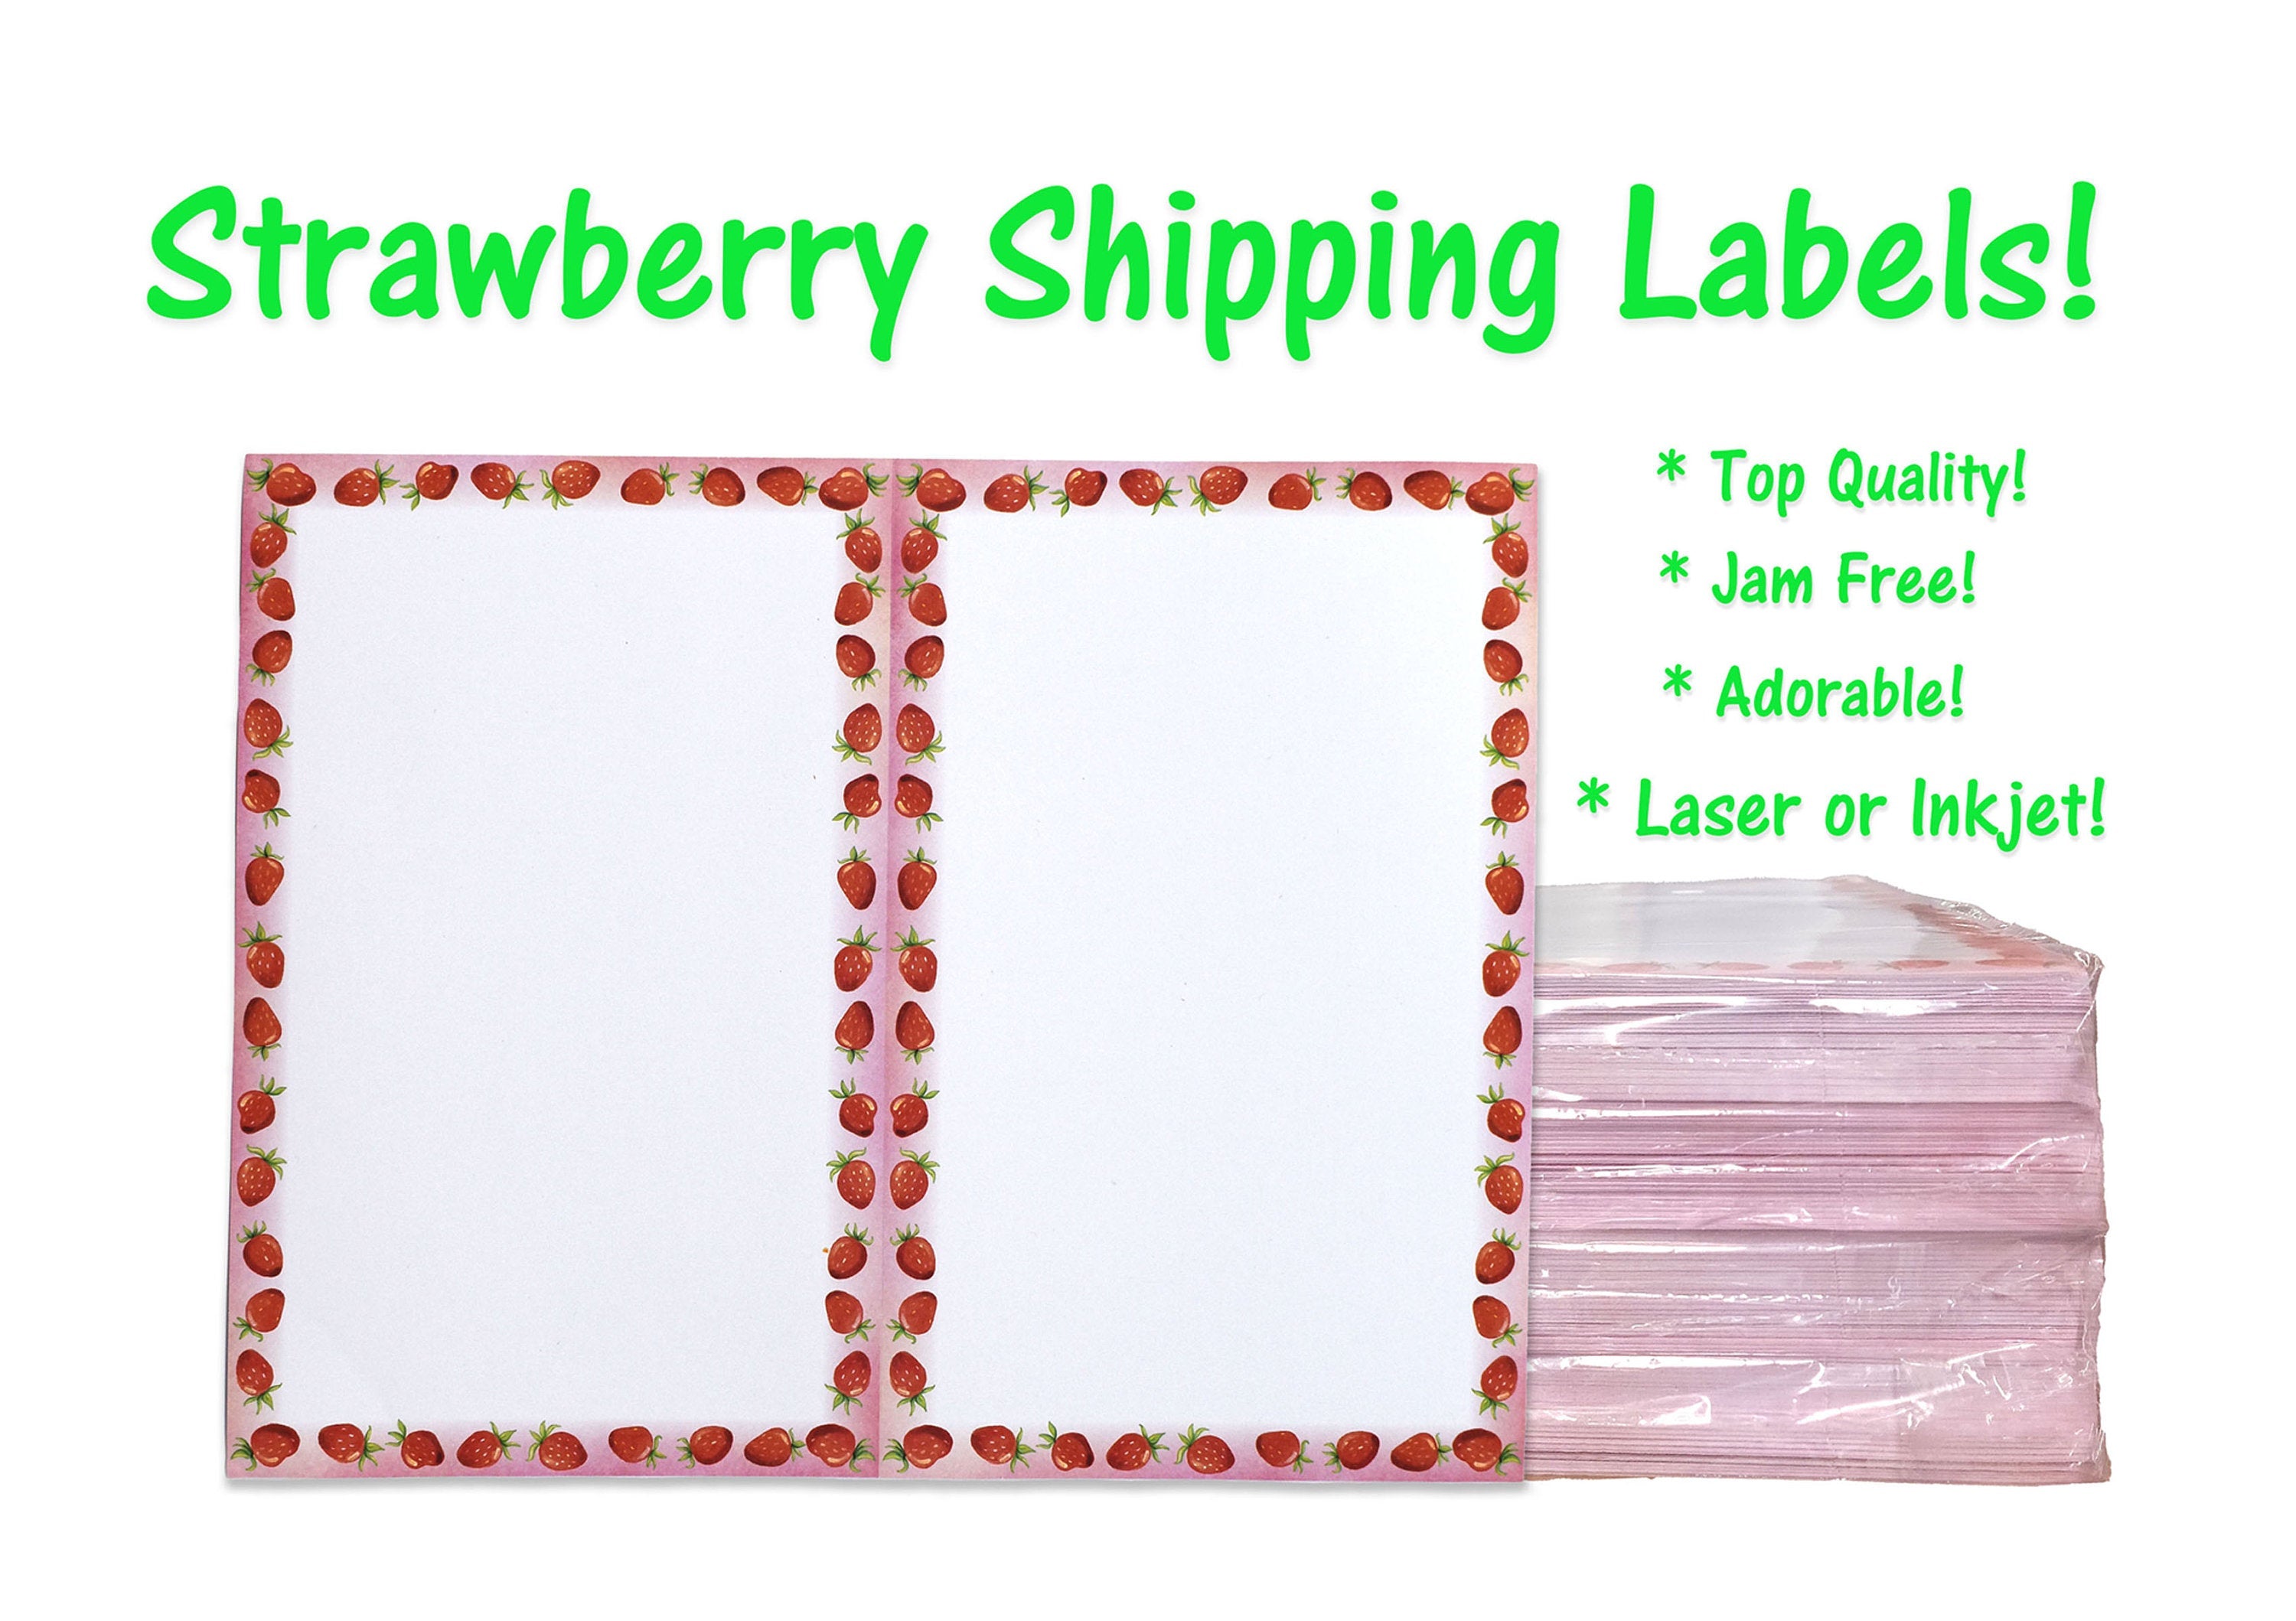 100 Shipping Labels Top Quality Jam Free, 2 Labels per Sheet for